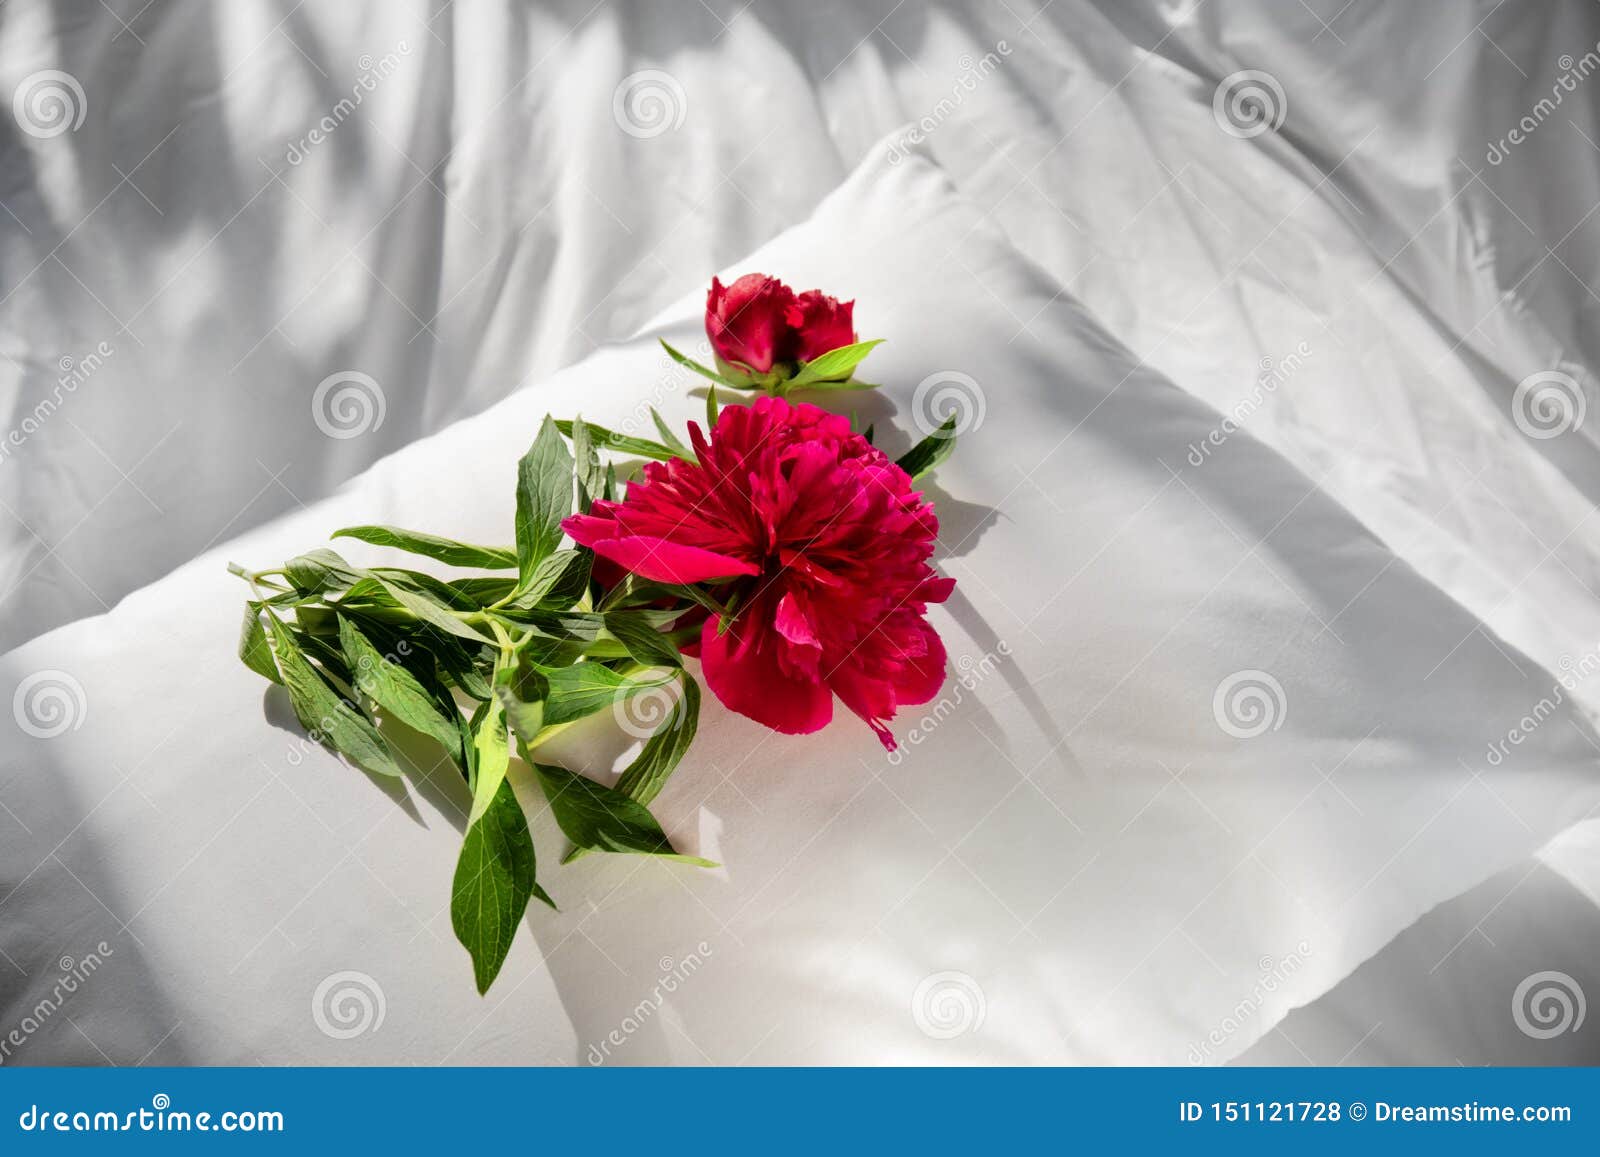 Flowers Staying on Open Book in Bed. Romantic Good Morning. Top ...